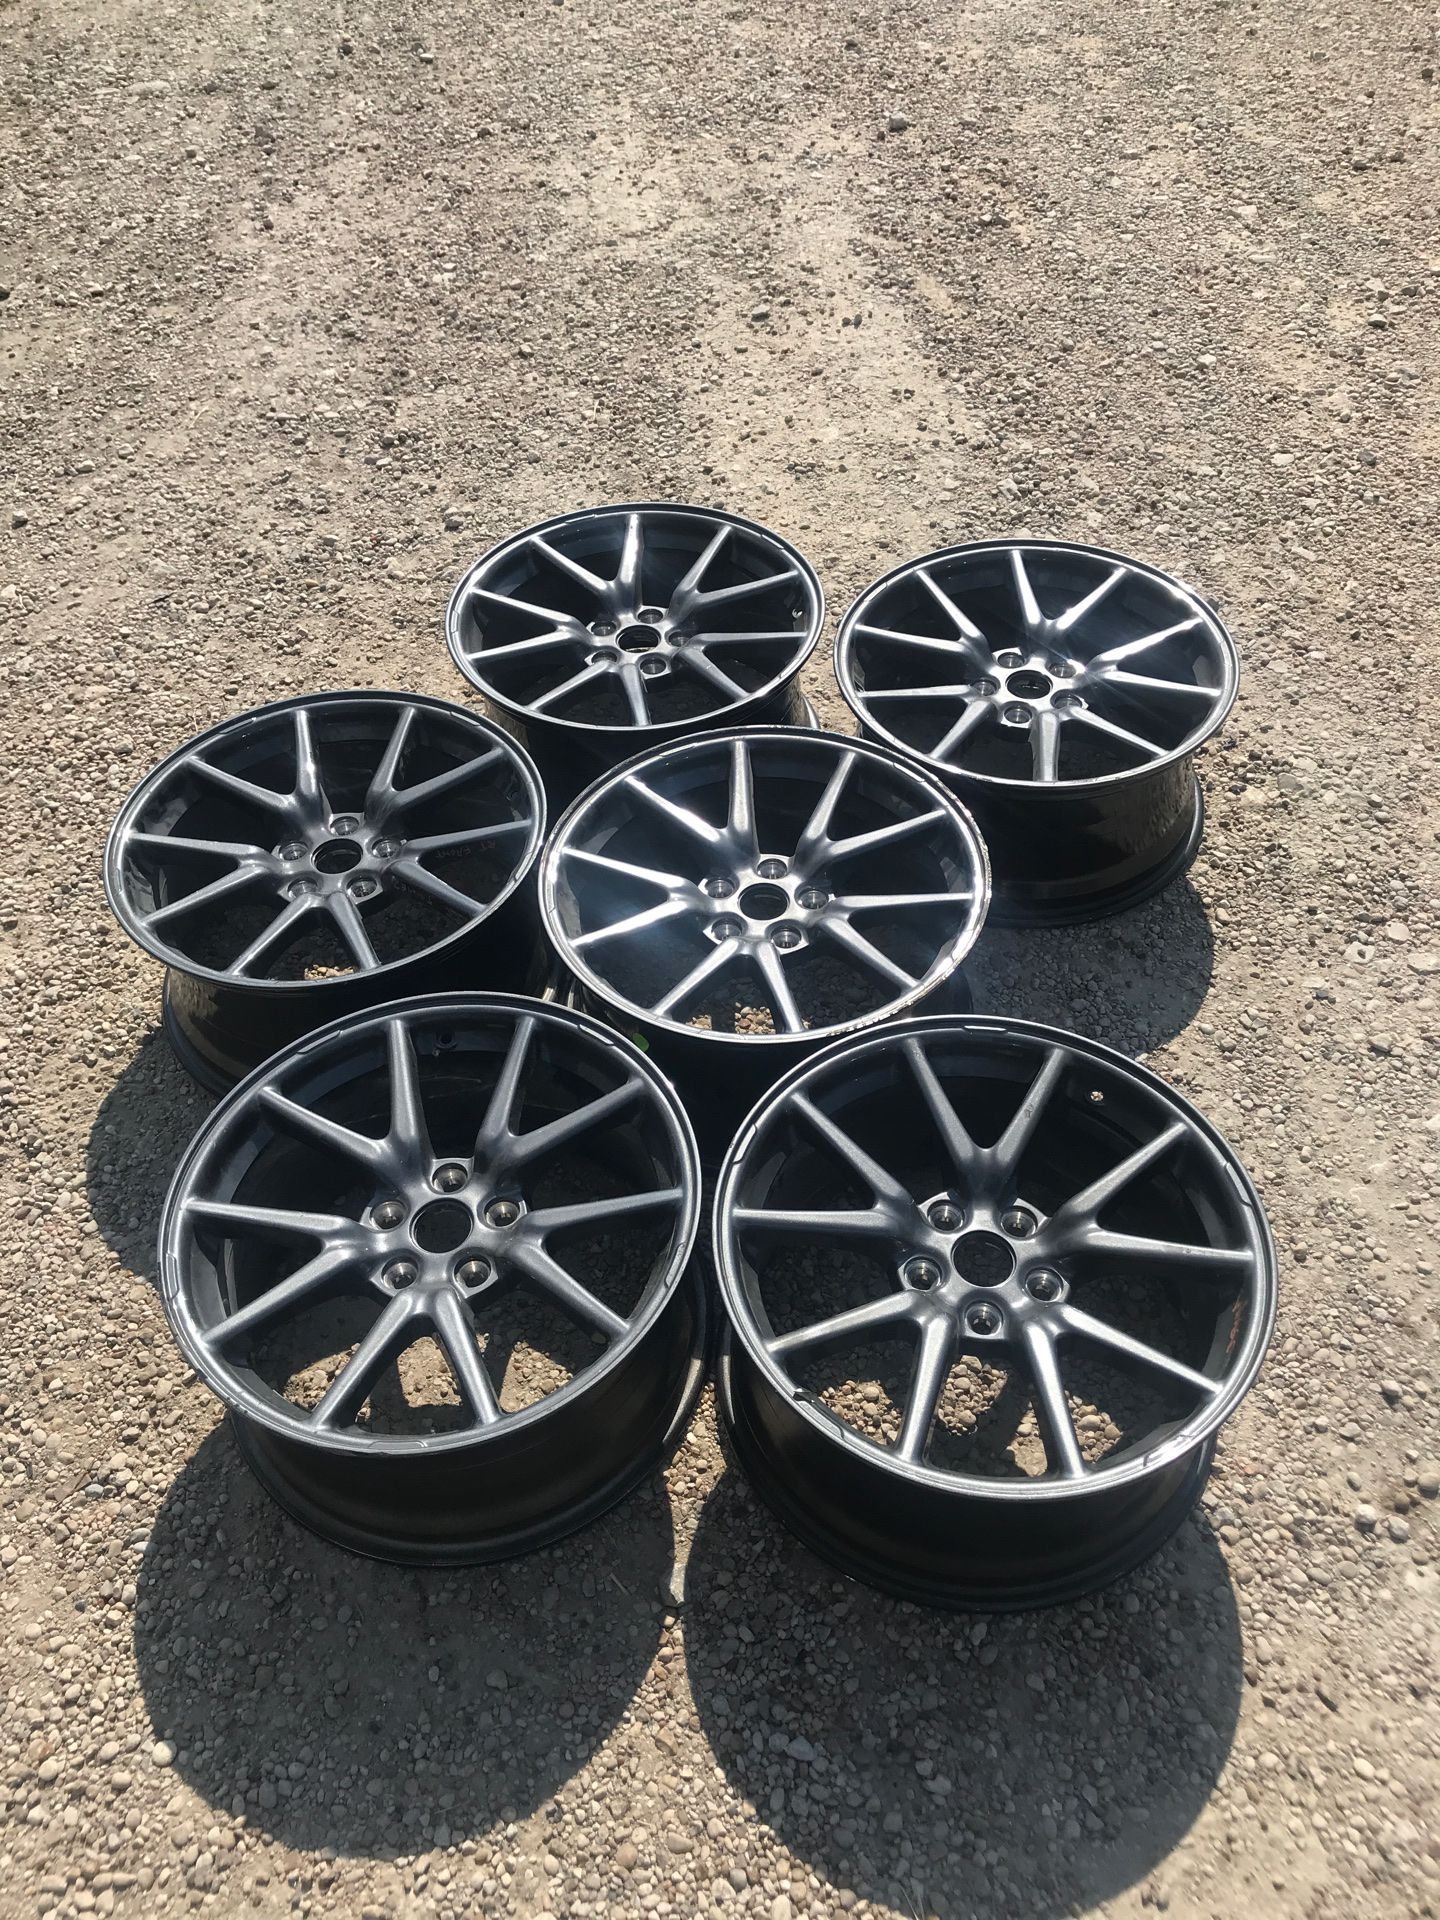 Tesla Model 3 Y parts 18” original OEM factory Alloy rims wheels straight aluminum 5x114.3 will fit Honda civic and other cars